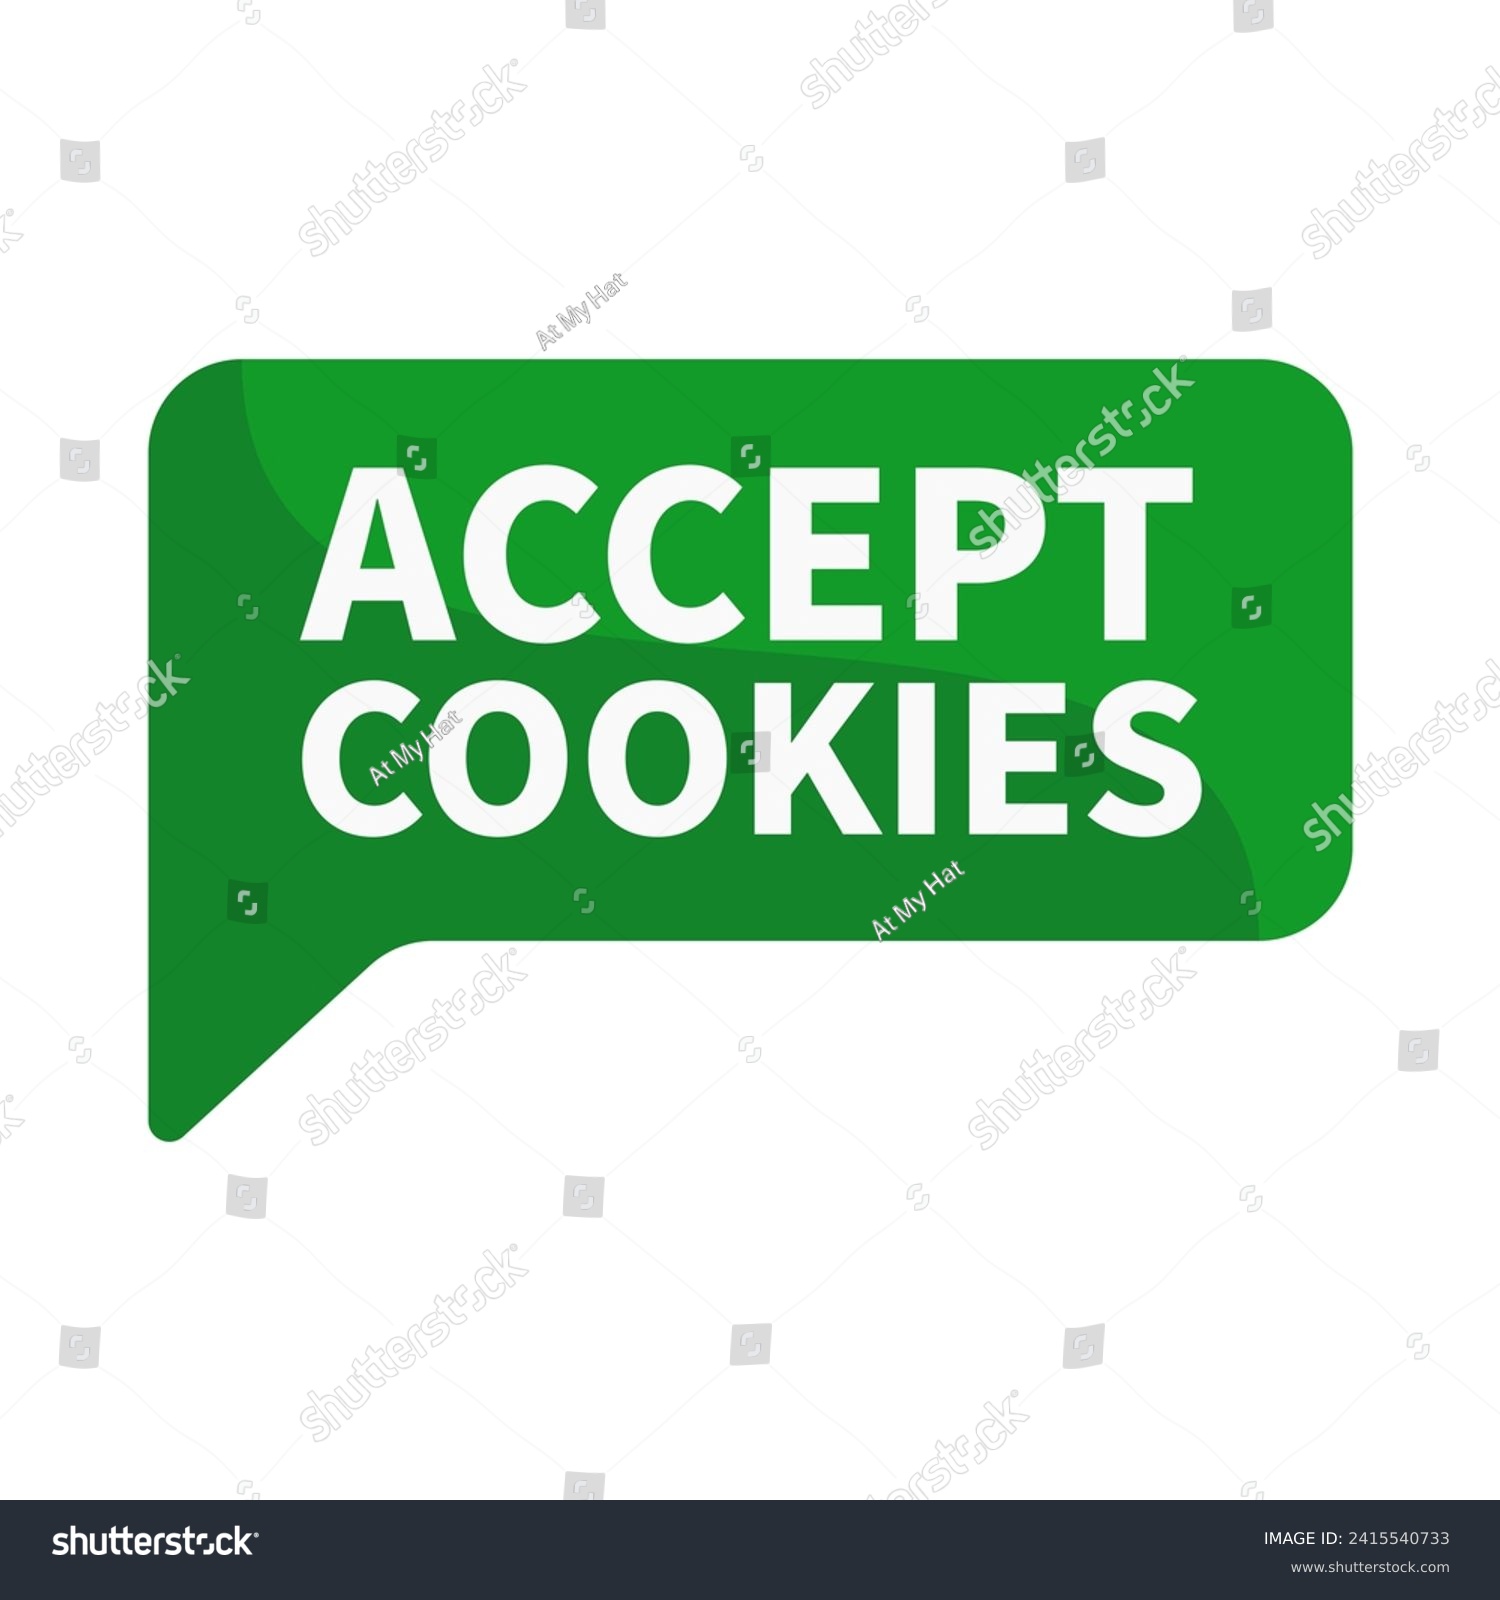 SVG of Accept Cookies Green Rectangle Shape For Sign Information Website Security
 svg